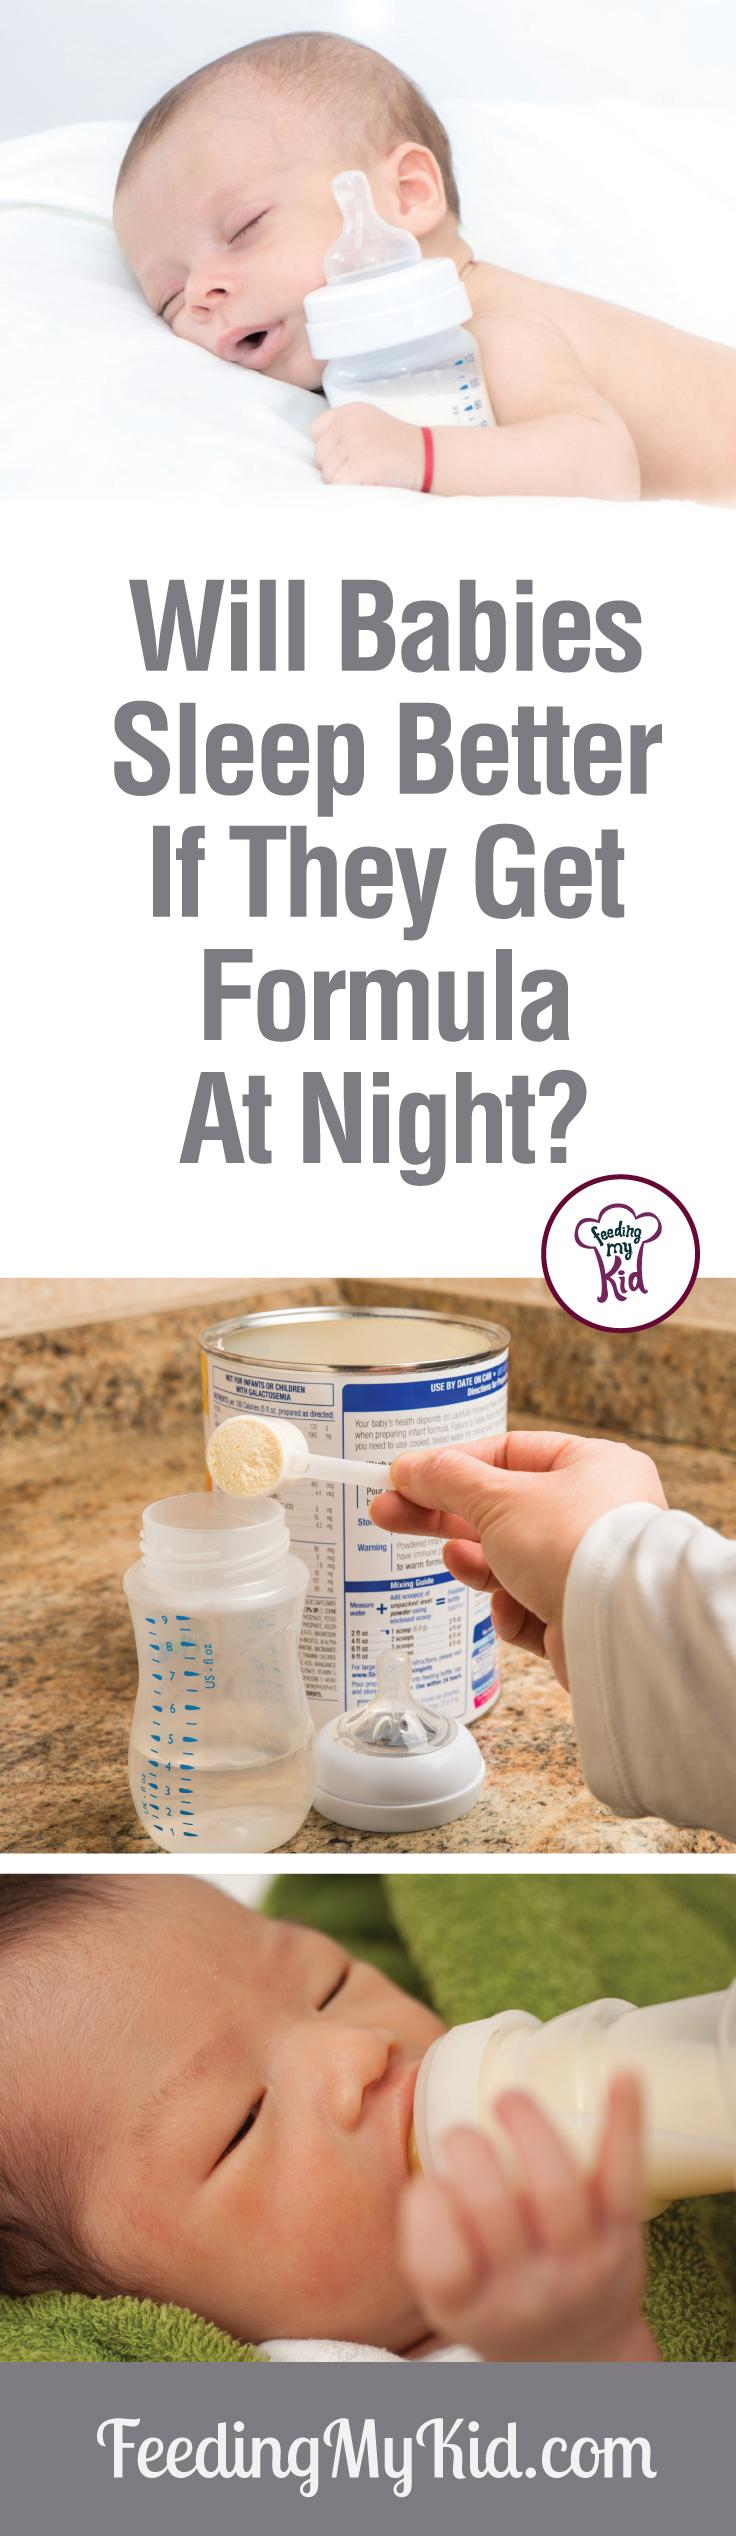 Is formula a quick-fix for getting babies to sleep better? Find out why feeding formula at night may not be the right solution. Feeding My Kid is filled with all the information you need about how to raise your kids, from healthy tips to nutritious recipes. #FeedingMyKid #newborn #newbornbaby #babywon’tsleep #babysleep #whendobabiessleepthroughthenight #babysleeptraining #howtomakebabysleep #sleepingthroughthenight